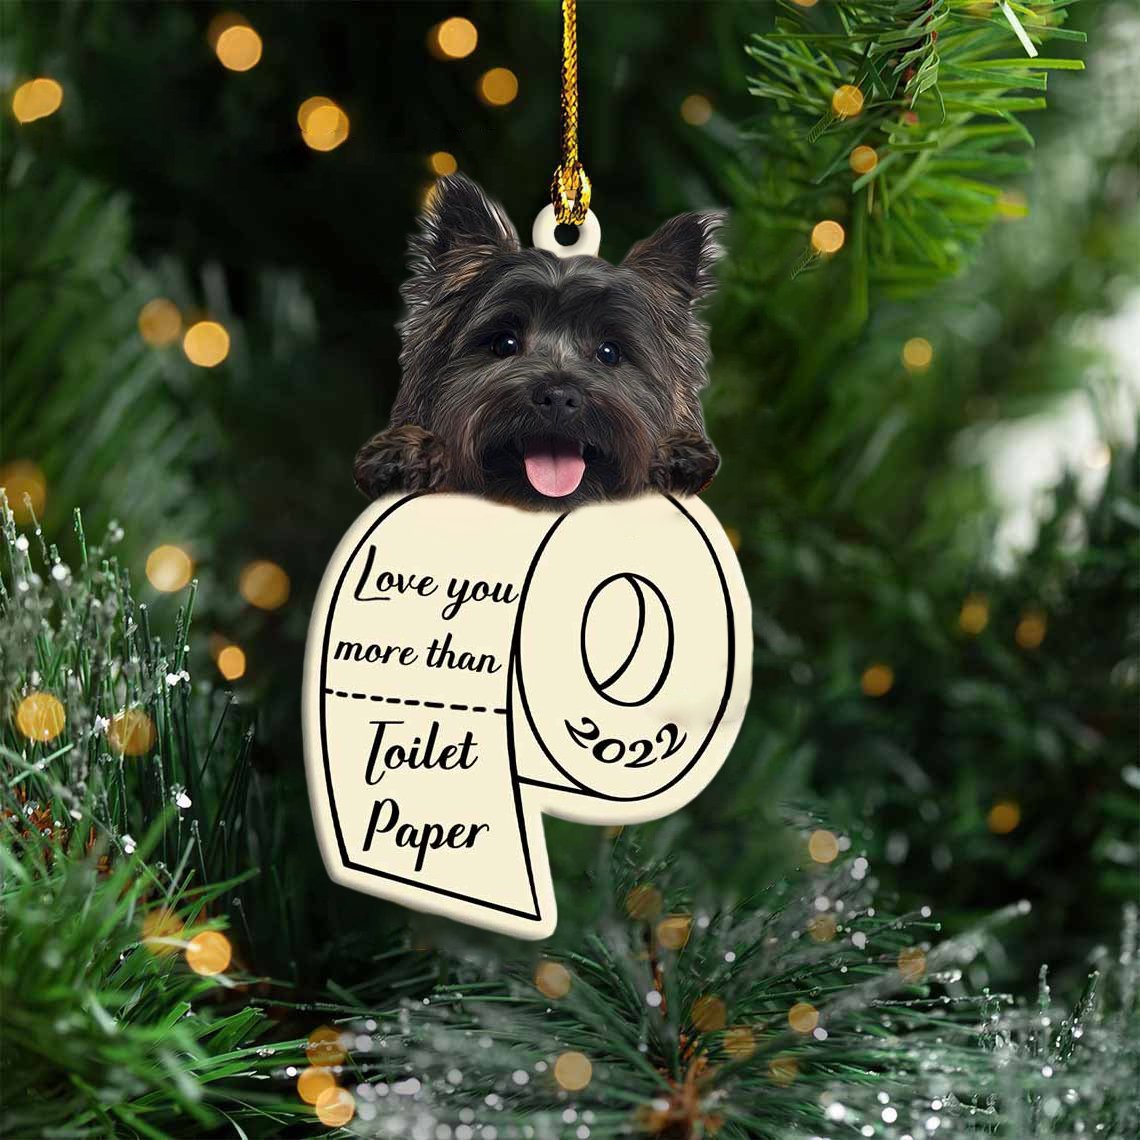 Cairn Terrier Love You More Than Toilet Paper 2022 Hanging Ornament